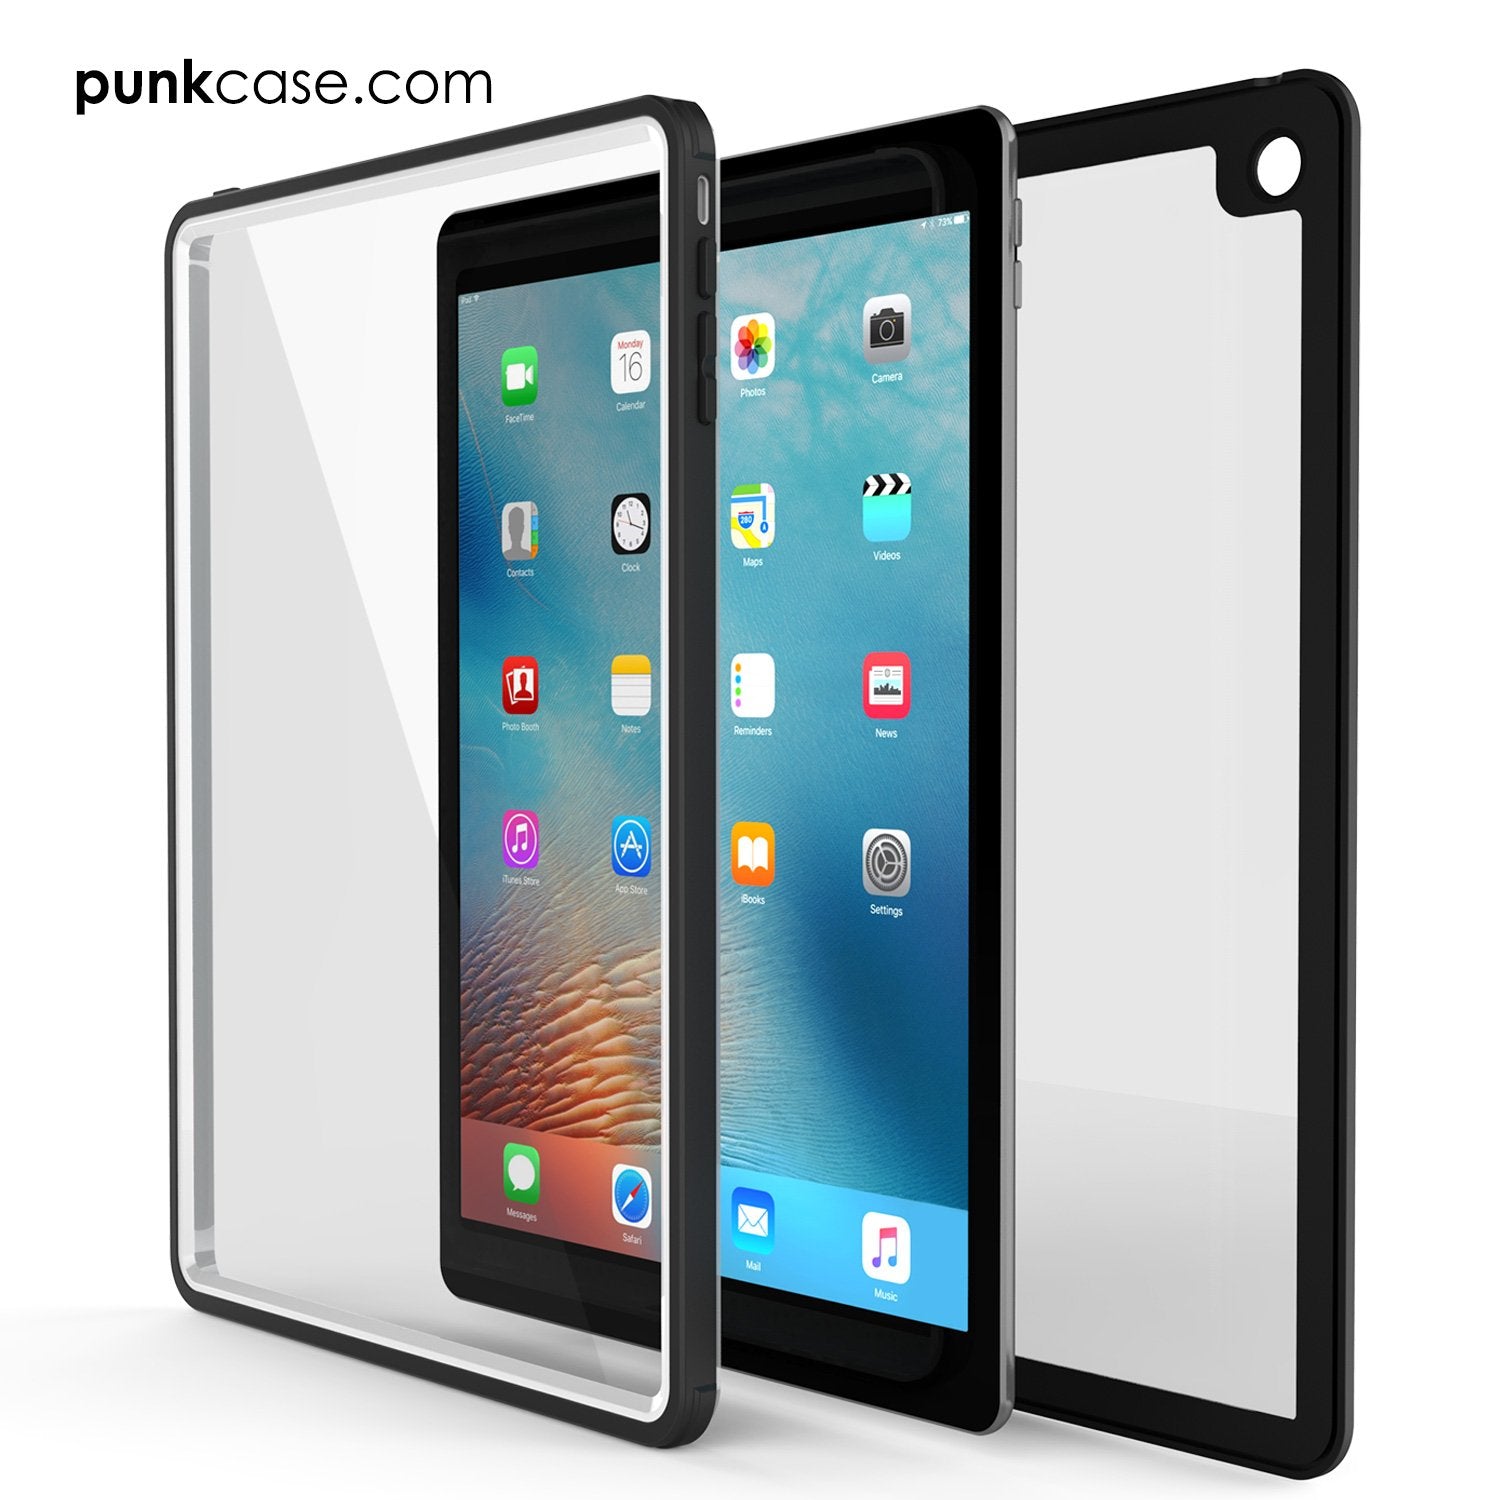 Punkcase iPad Pro 9.7 Case [CRYSTAL Series], Waterproof, Ultra-Thin Cover [Shockproof] [Dustproof] with Built-in Screen Protector [White]